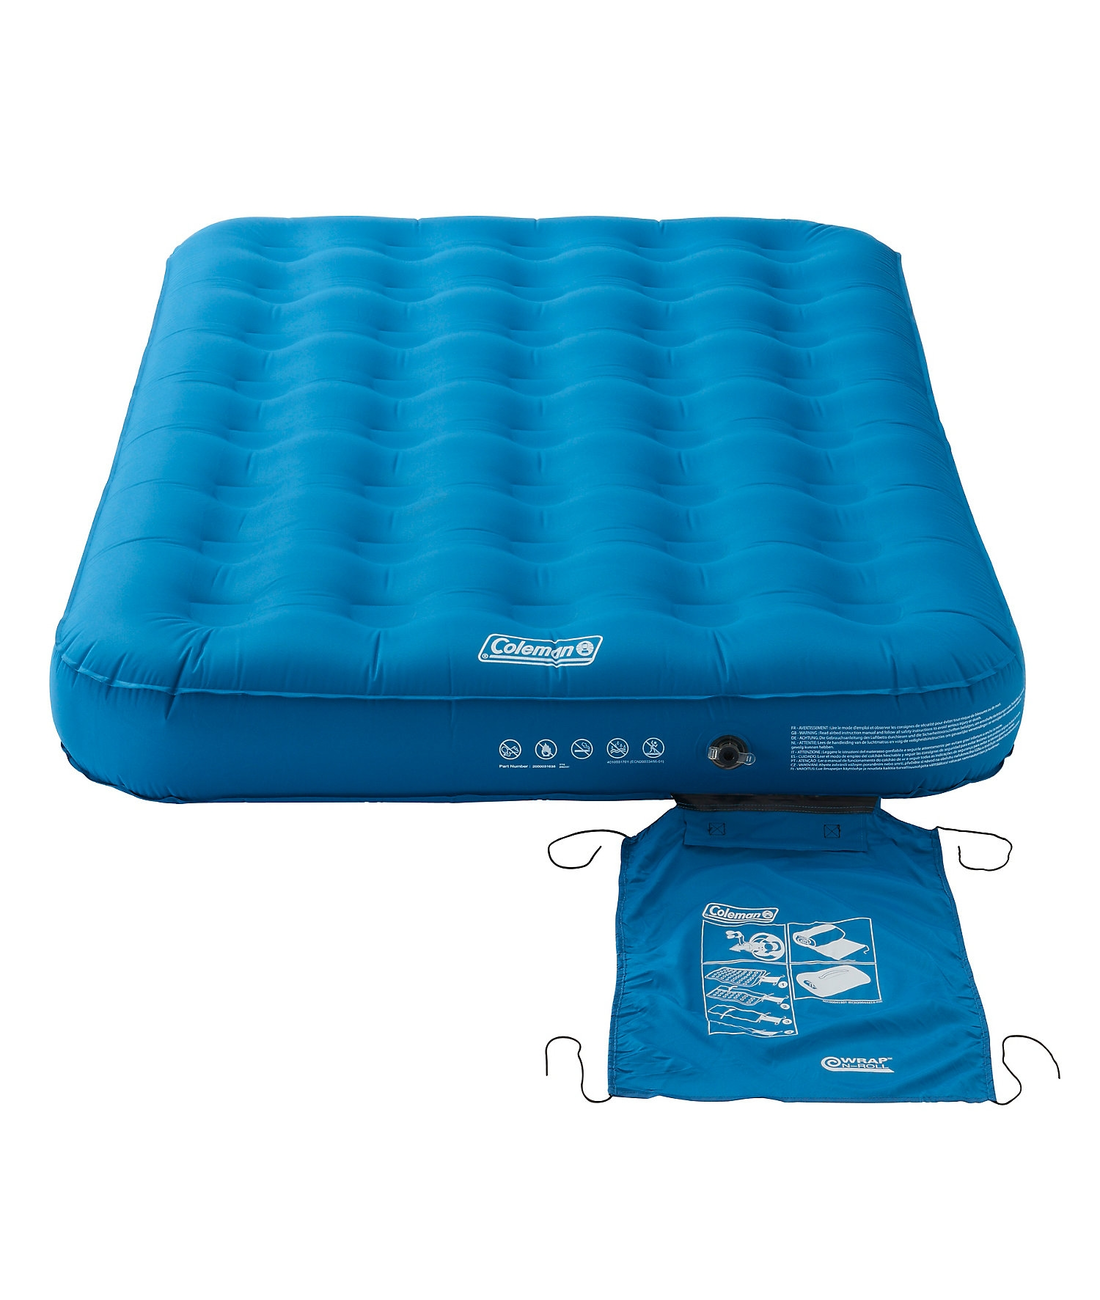 Extra Durable Airbed